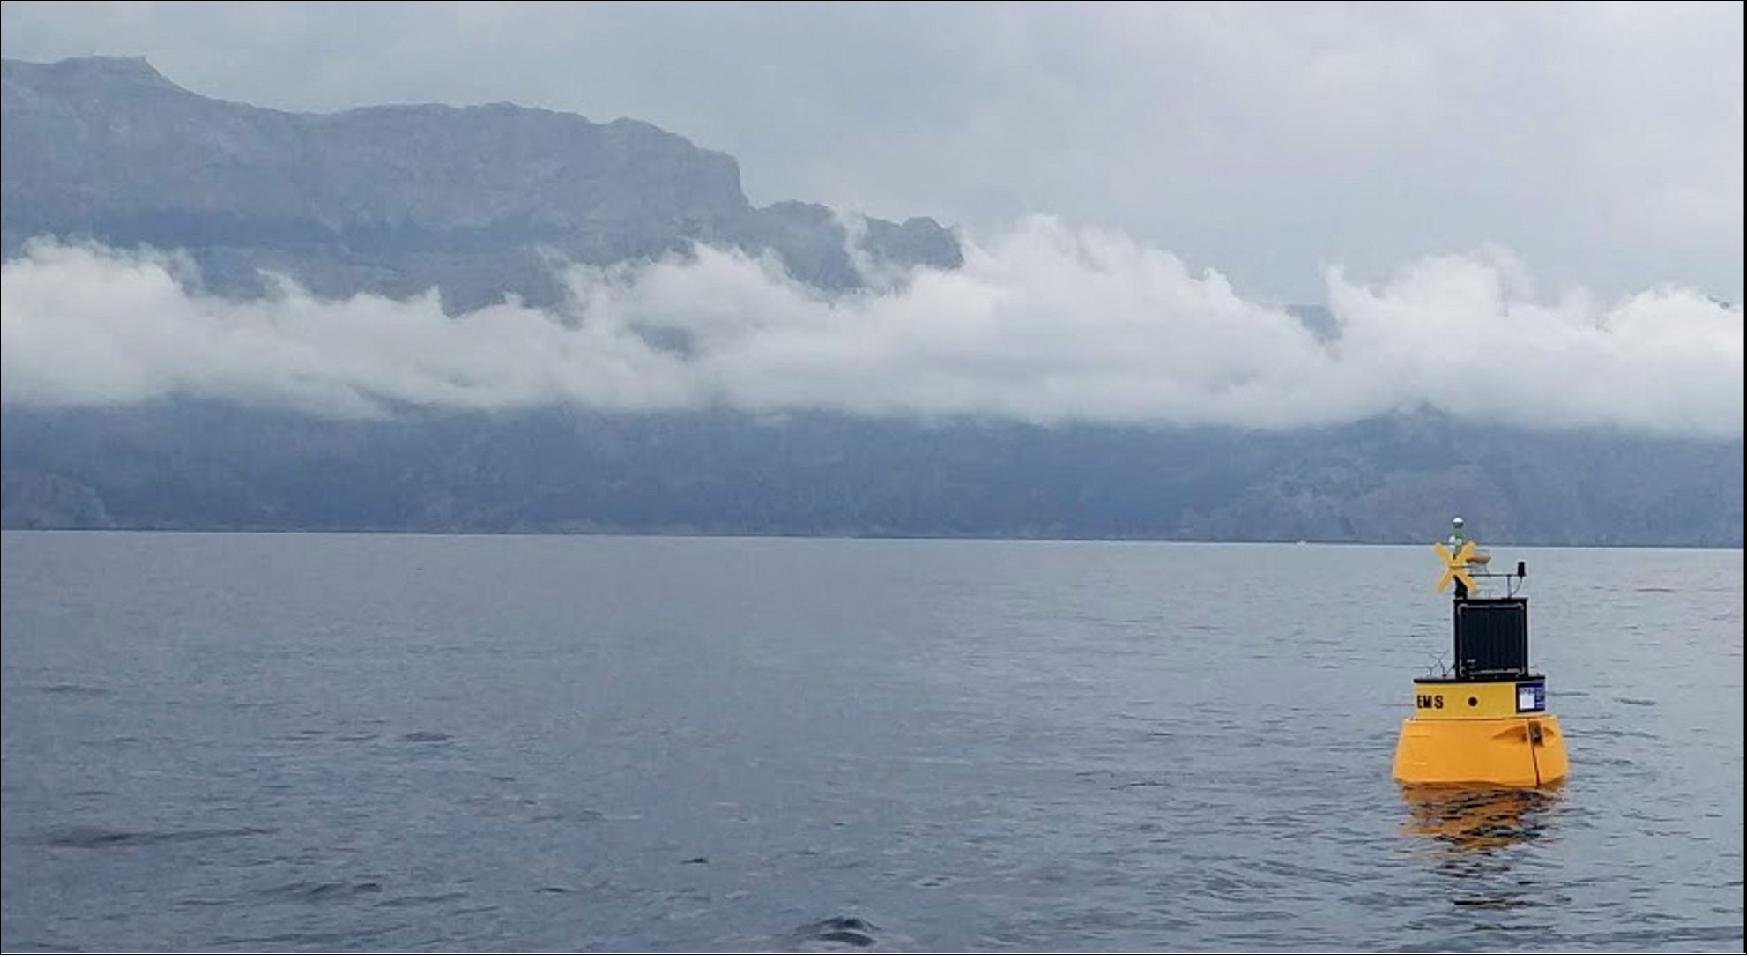 Figure 31: This localization buoy was placed in the sea off Mallorca to help validate results from the GNSS reflectometry test campaign. The satnav receivers can be seen atop the Mallorca skyline (image credit: Institute for Space Studies of Catalonia)